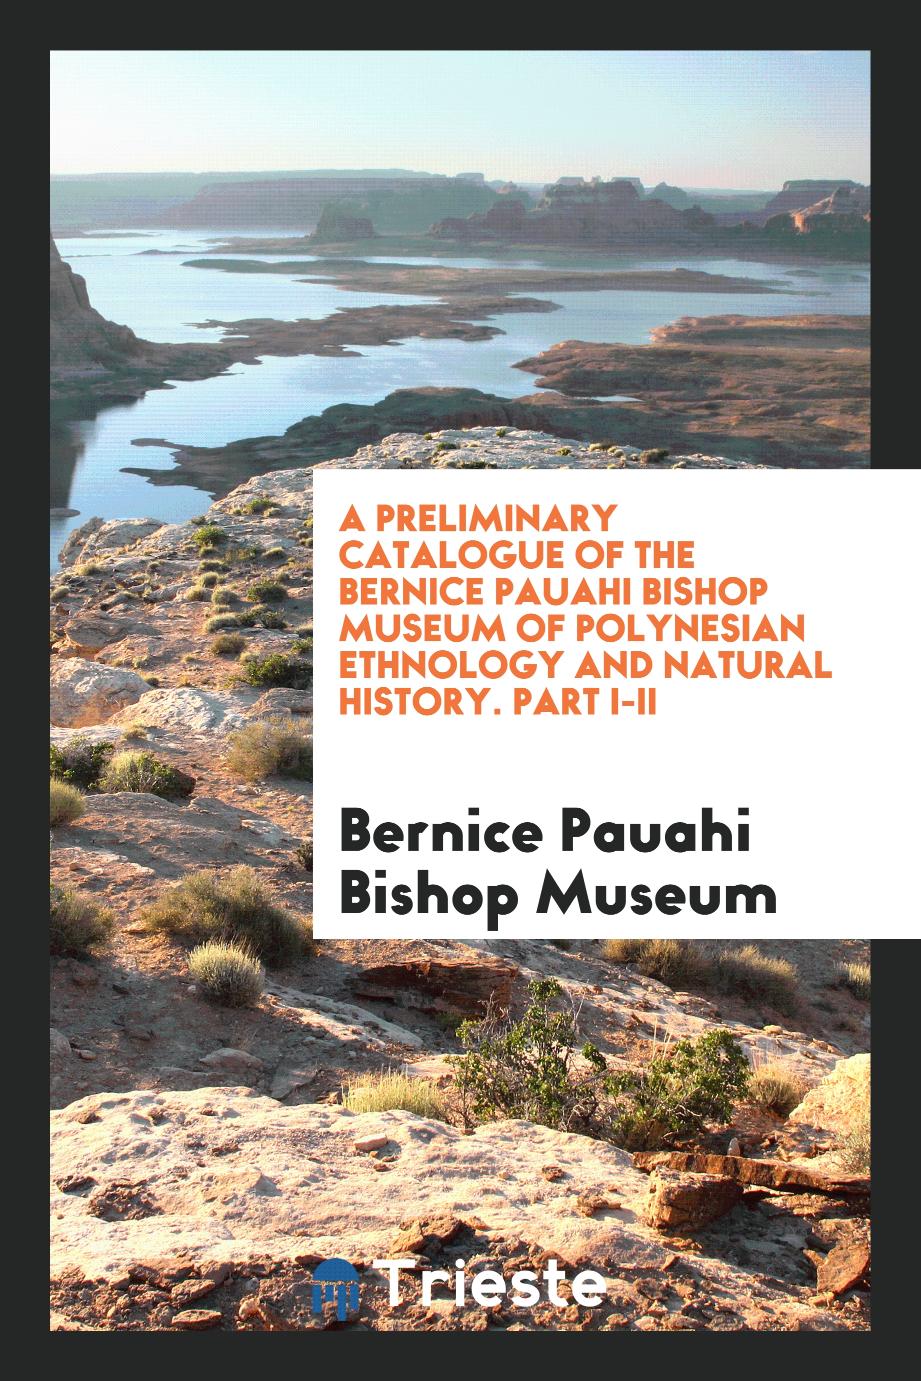 A Preliminary Catalogue of the Bernice Pauahi Bishop Museum of Polynesian Ethnology and Natural History. Part I-II